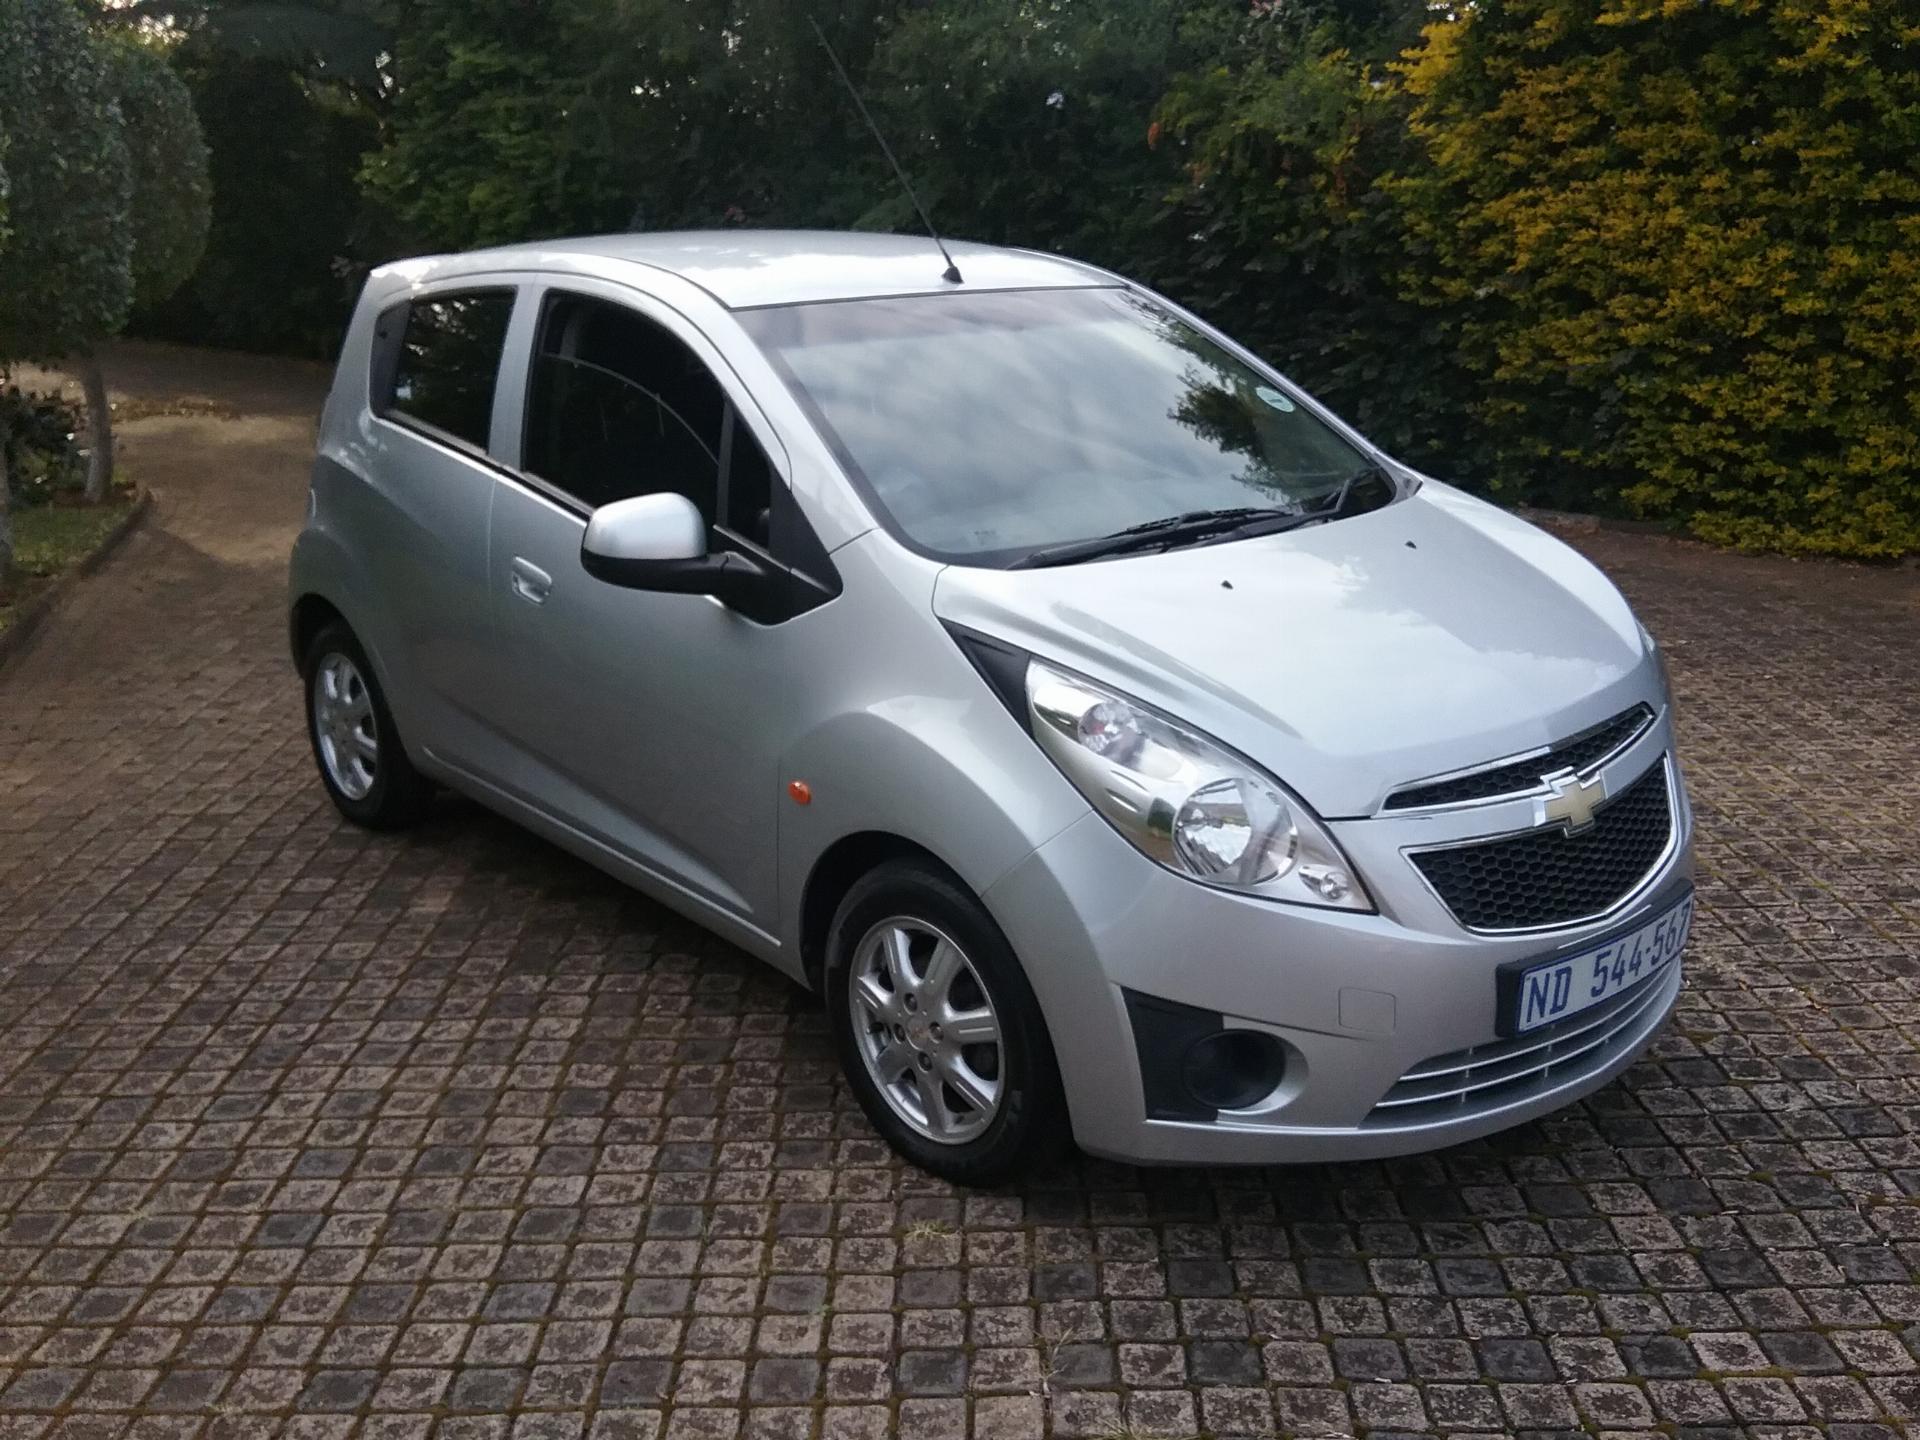 Used Chevrolet Spark 1.2 LS 2011 on auction MC1907060002